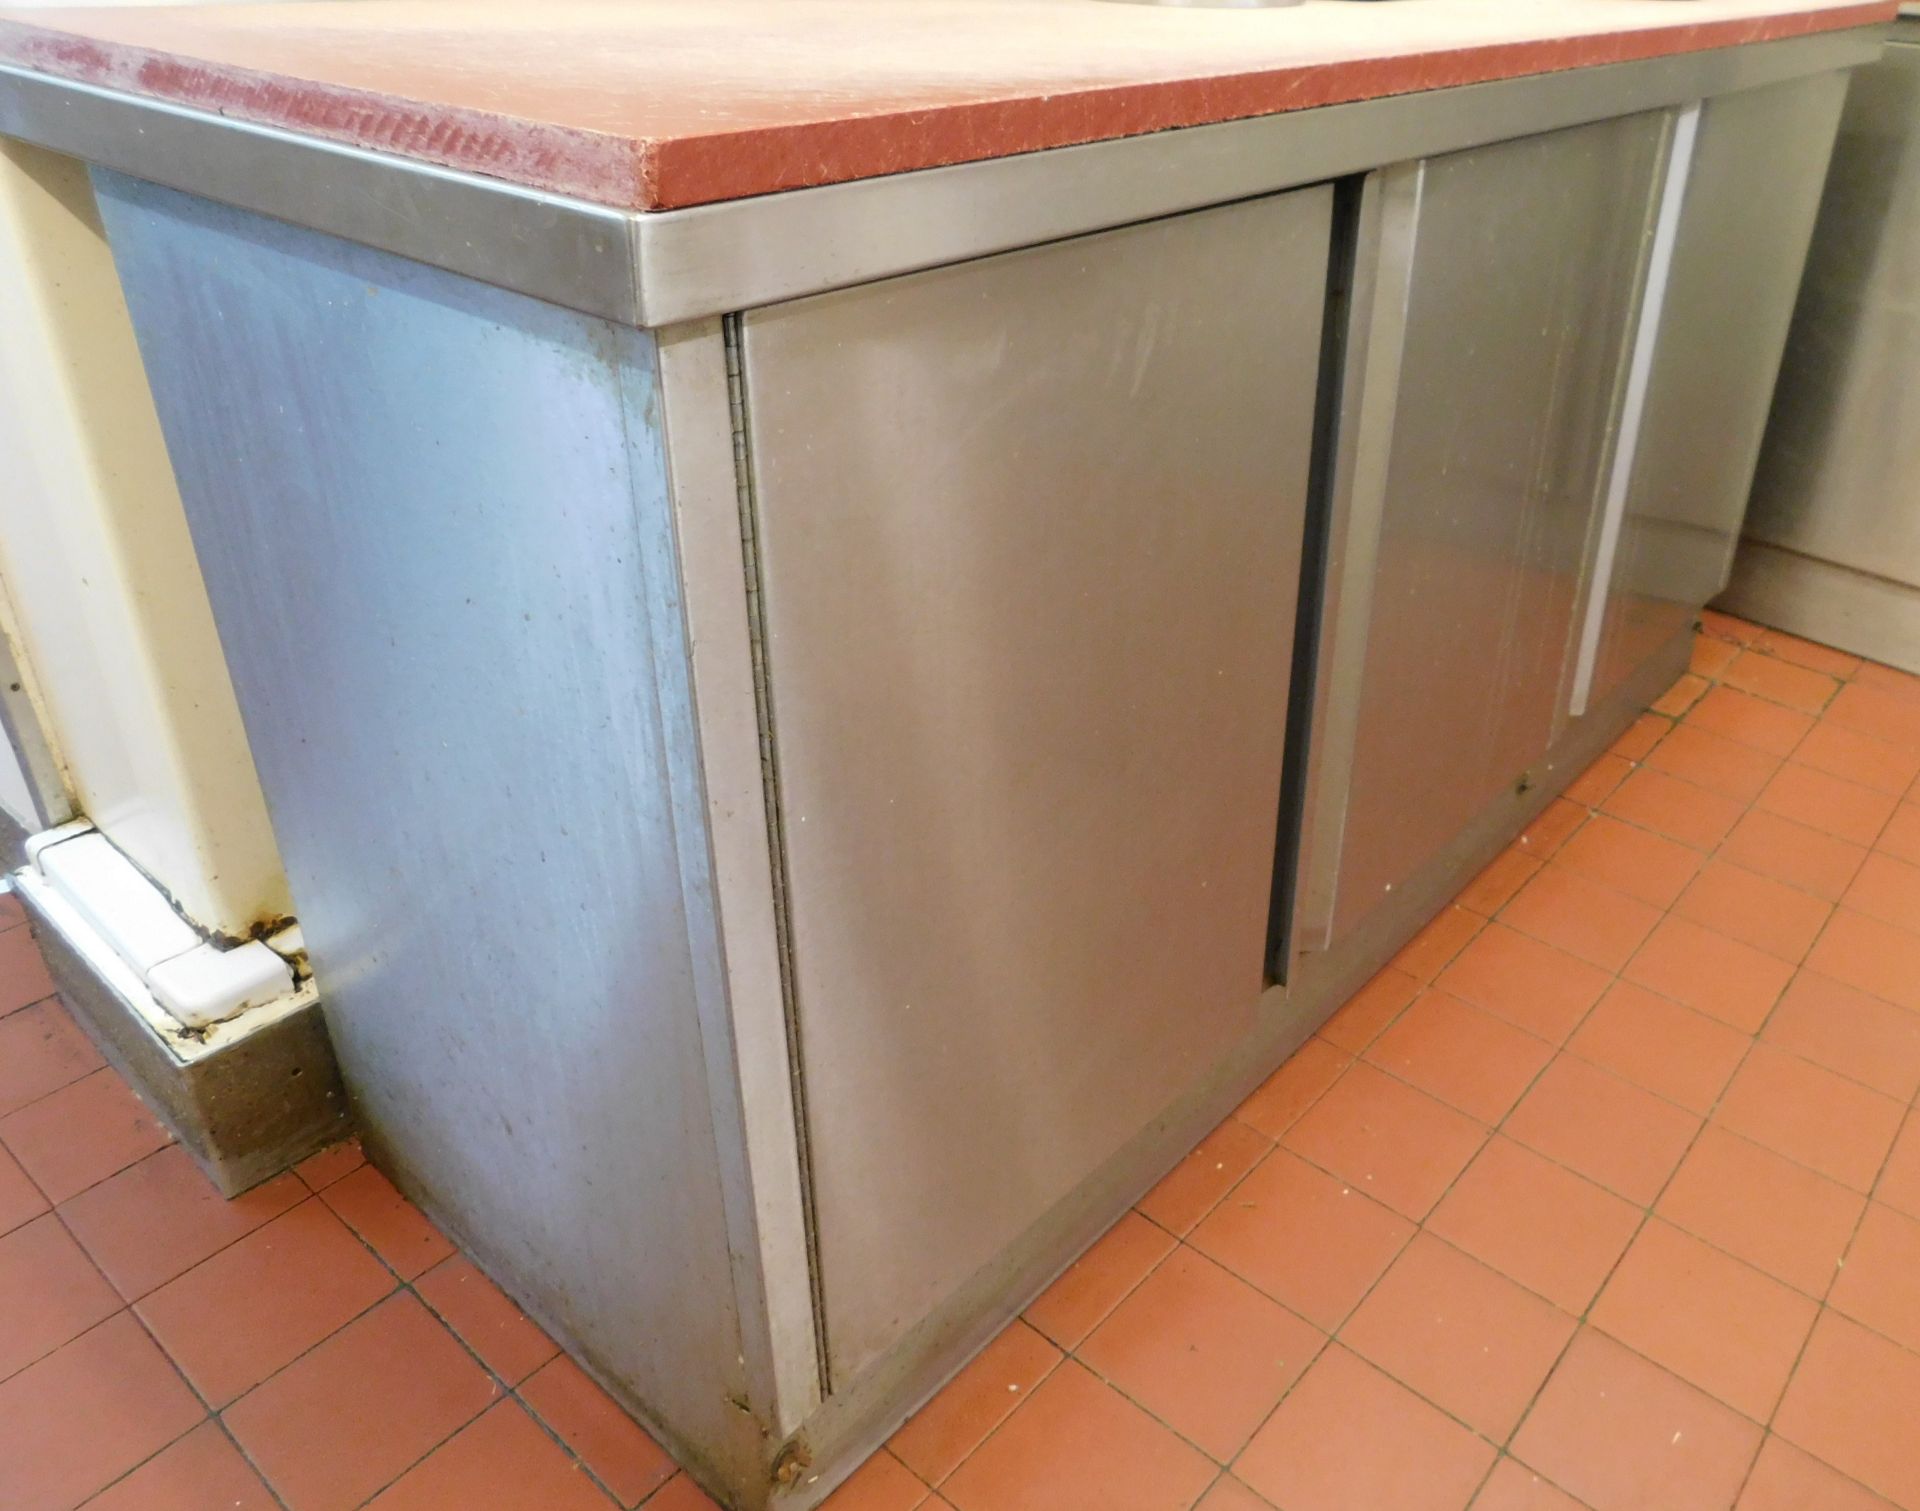 Stainless Steel 3-Door Cabinet with Red Chopping Board Top (180cm W Approx.) (Location: